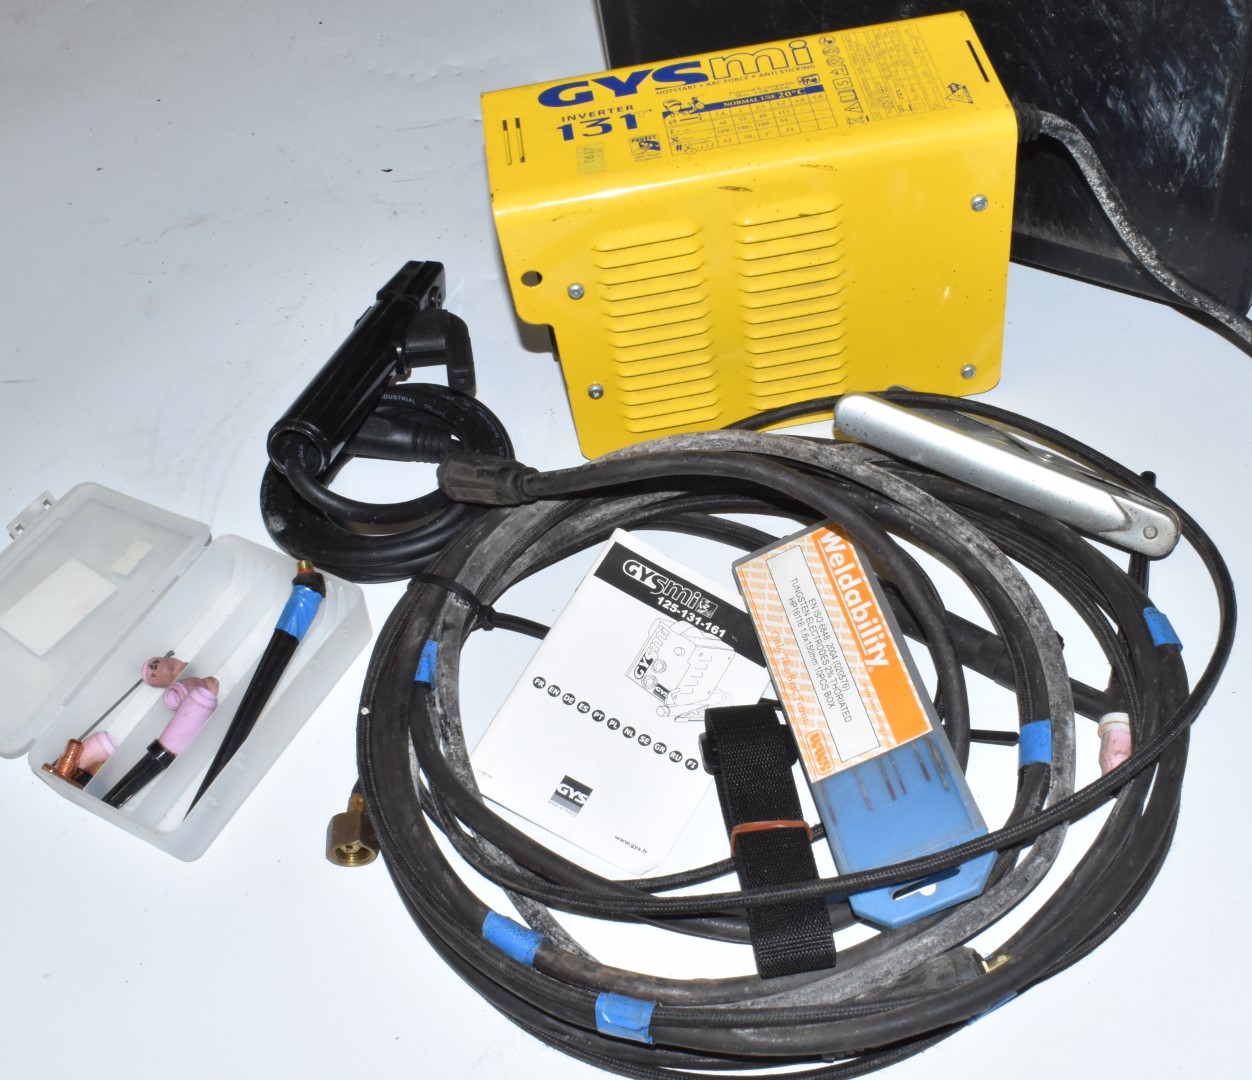 Gysmi 131T inverter TIG welder, in original carry case with torch, earth lead, stick welding lead, - Image 3 of 3